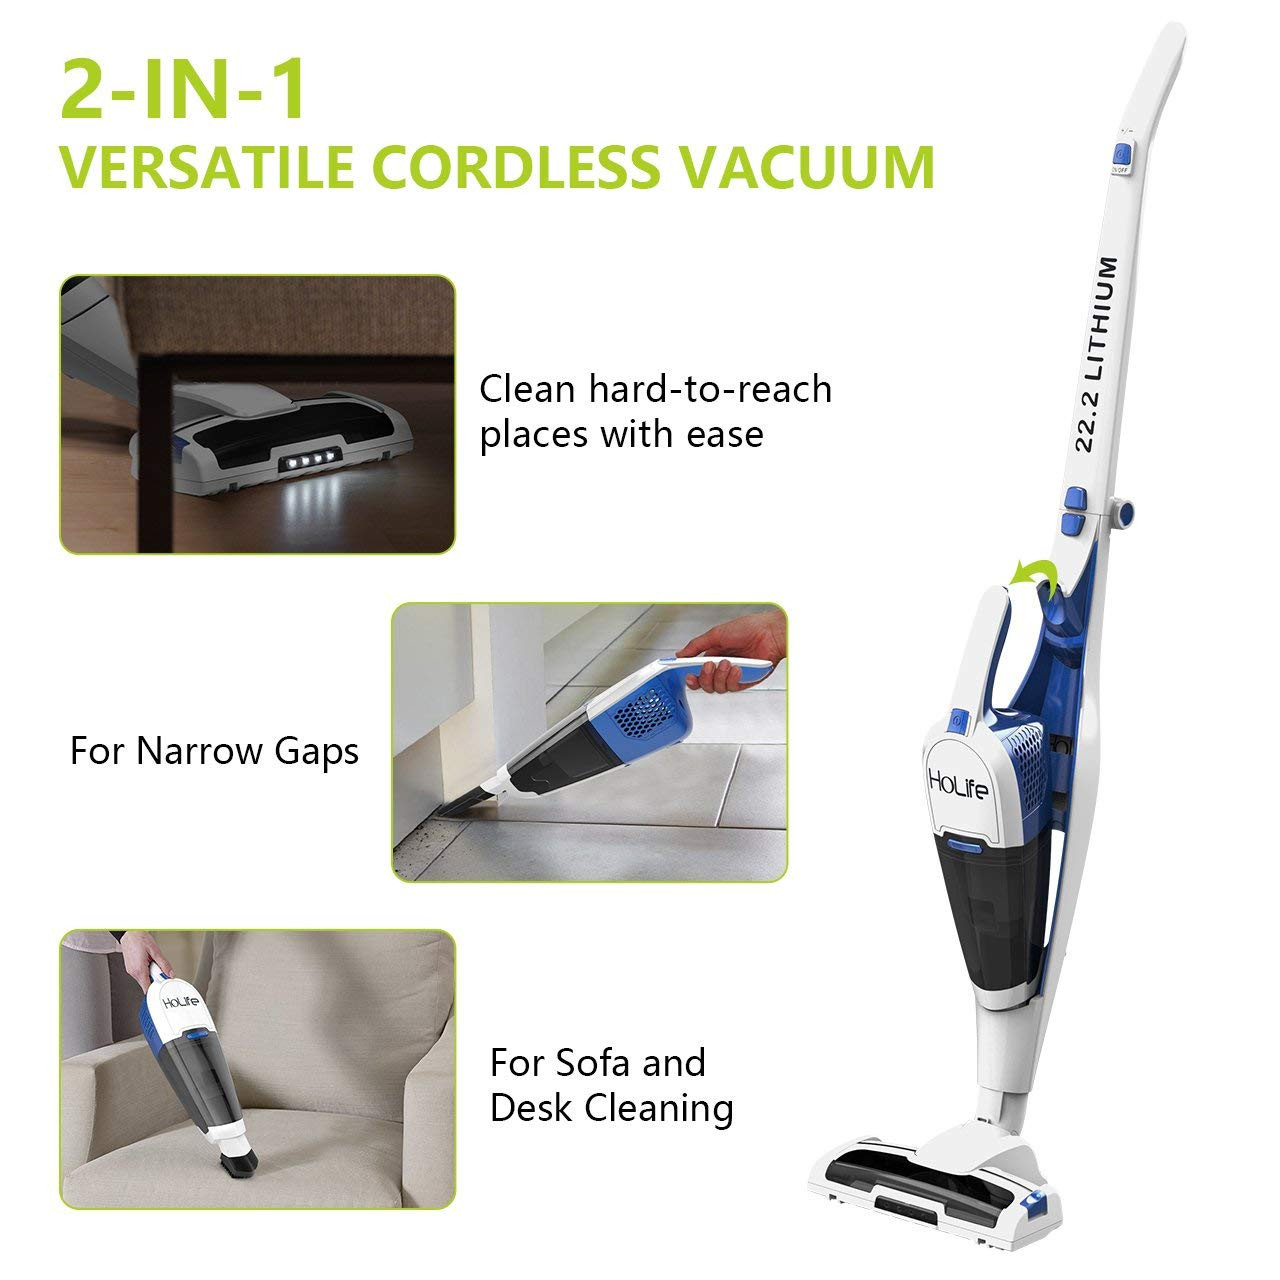 best cordless vacuum for pet hair and hardwood floors of amazon com vacuum cleaner holife 2 in 1 upright handheld vacuum with regard to amazon com vacuum cleaner holife 2 in 1 upright handheld vacuum cordless rechargeable bagless stick with led light everything else